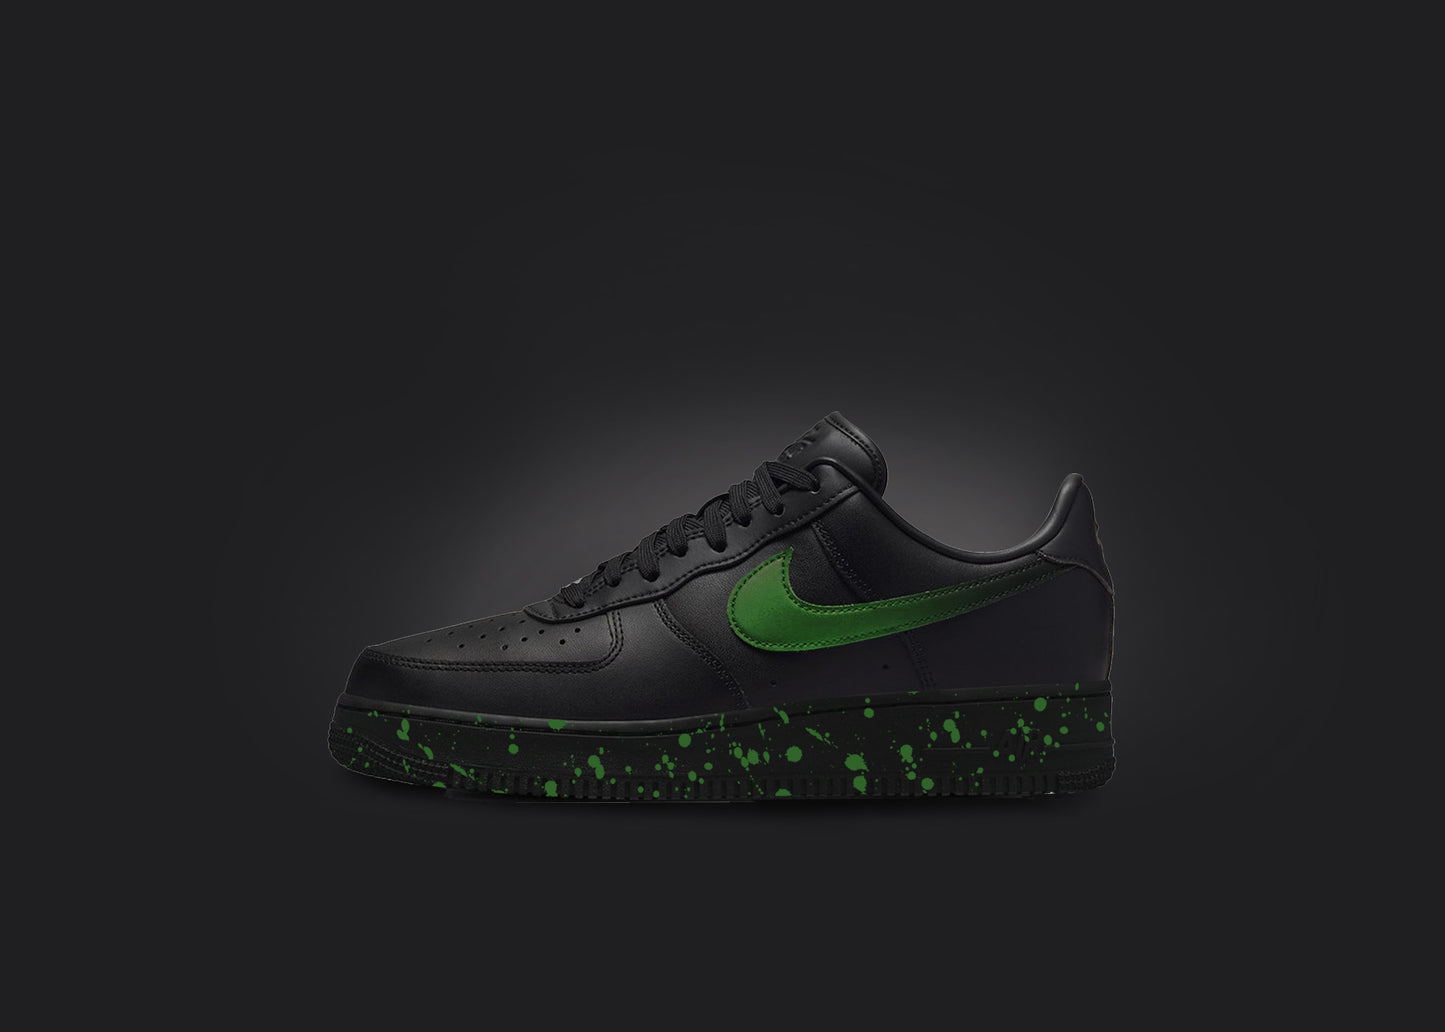 The image is featuring a custom black Air force 1 sneaker on a blank black background. The black nike sneaker has a green paint splatter design on the sole and a green fade on the nike logo. 